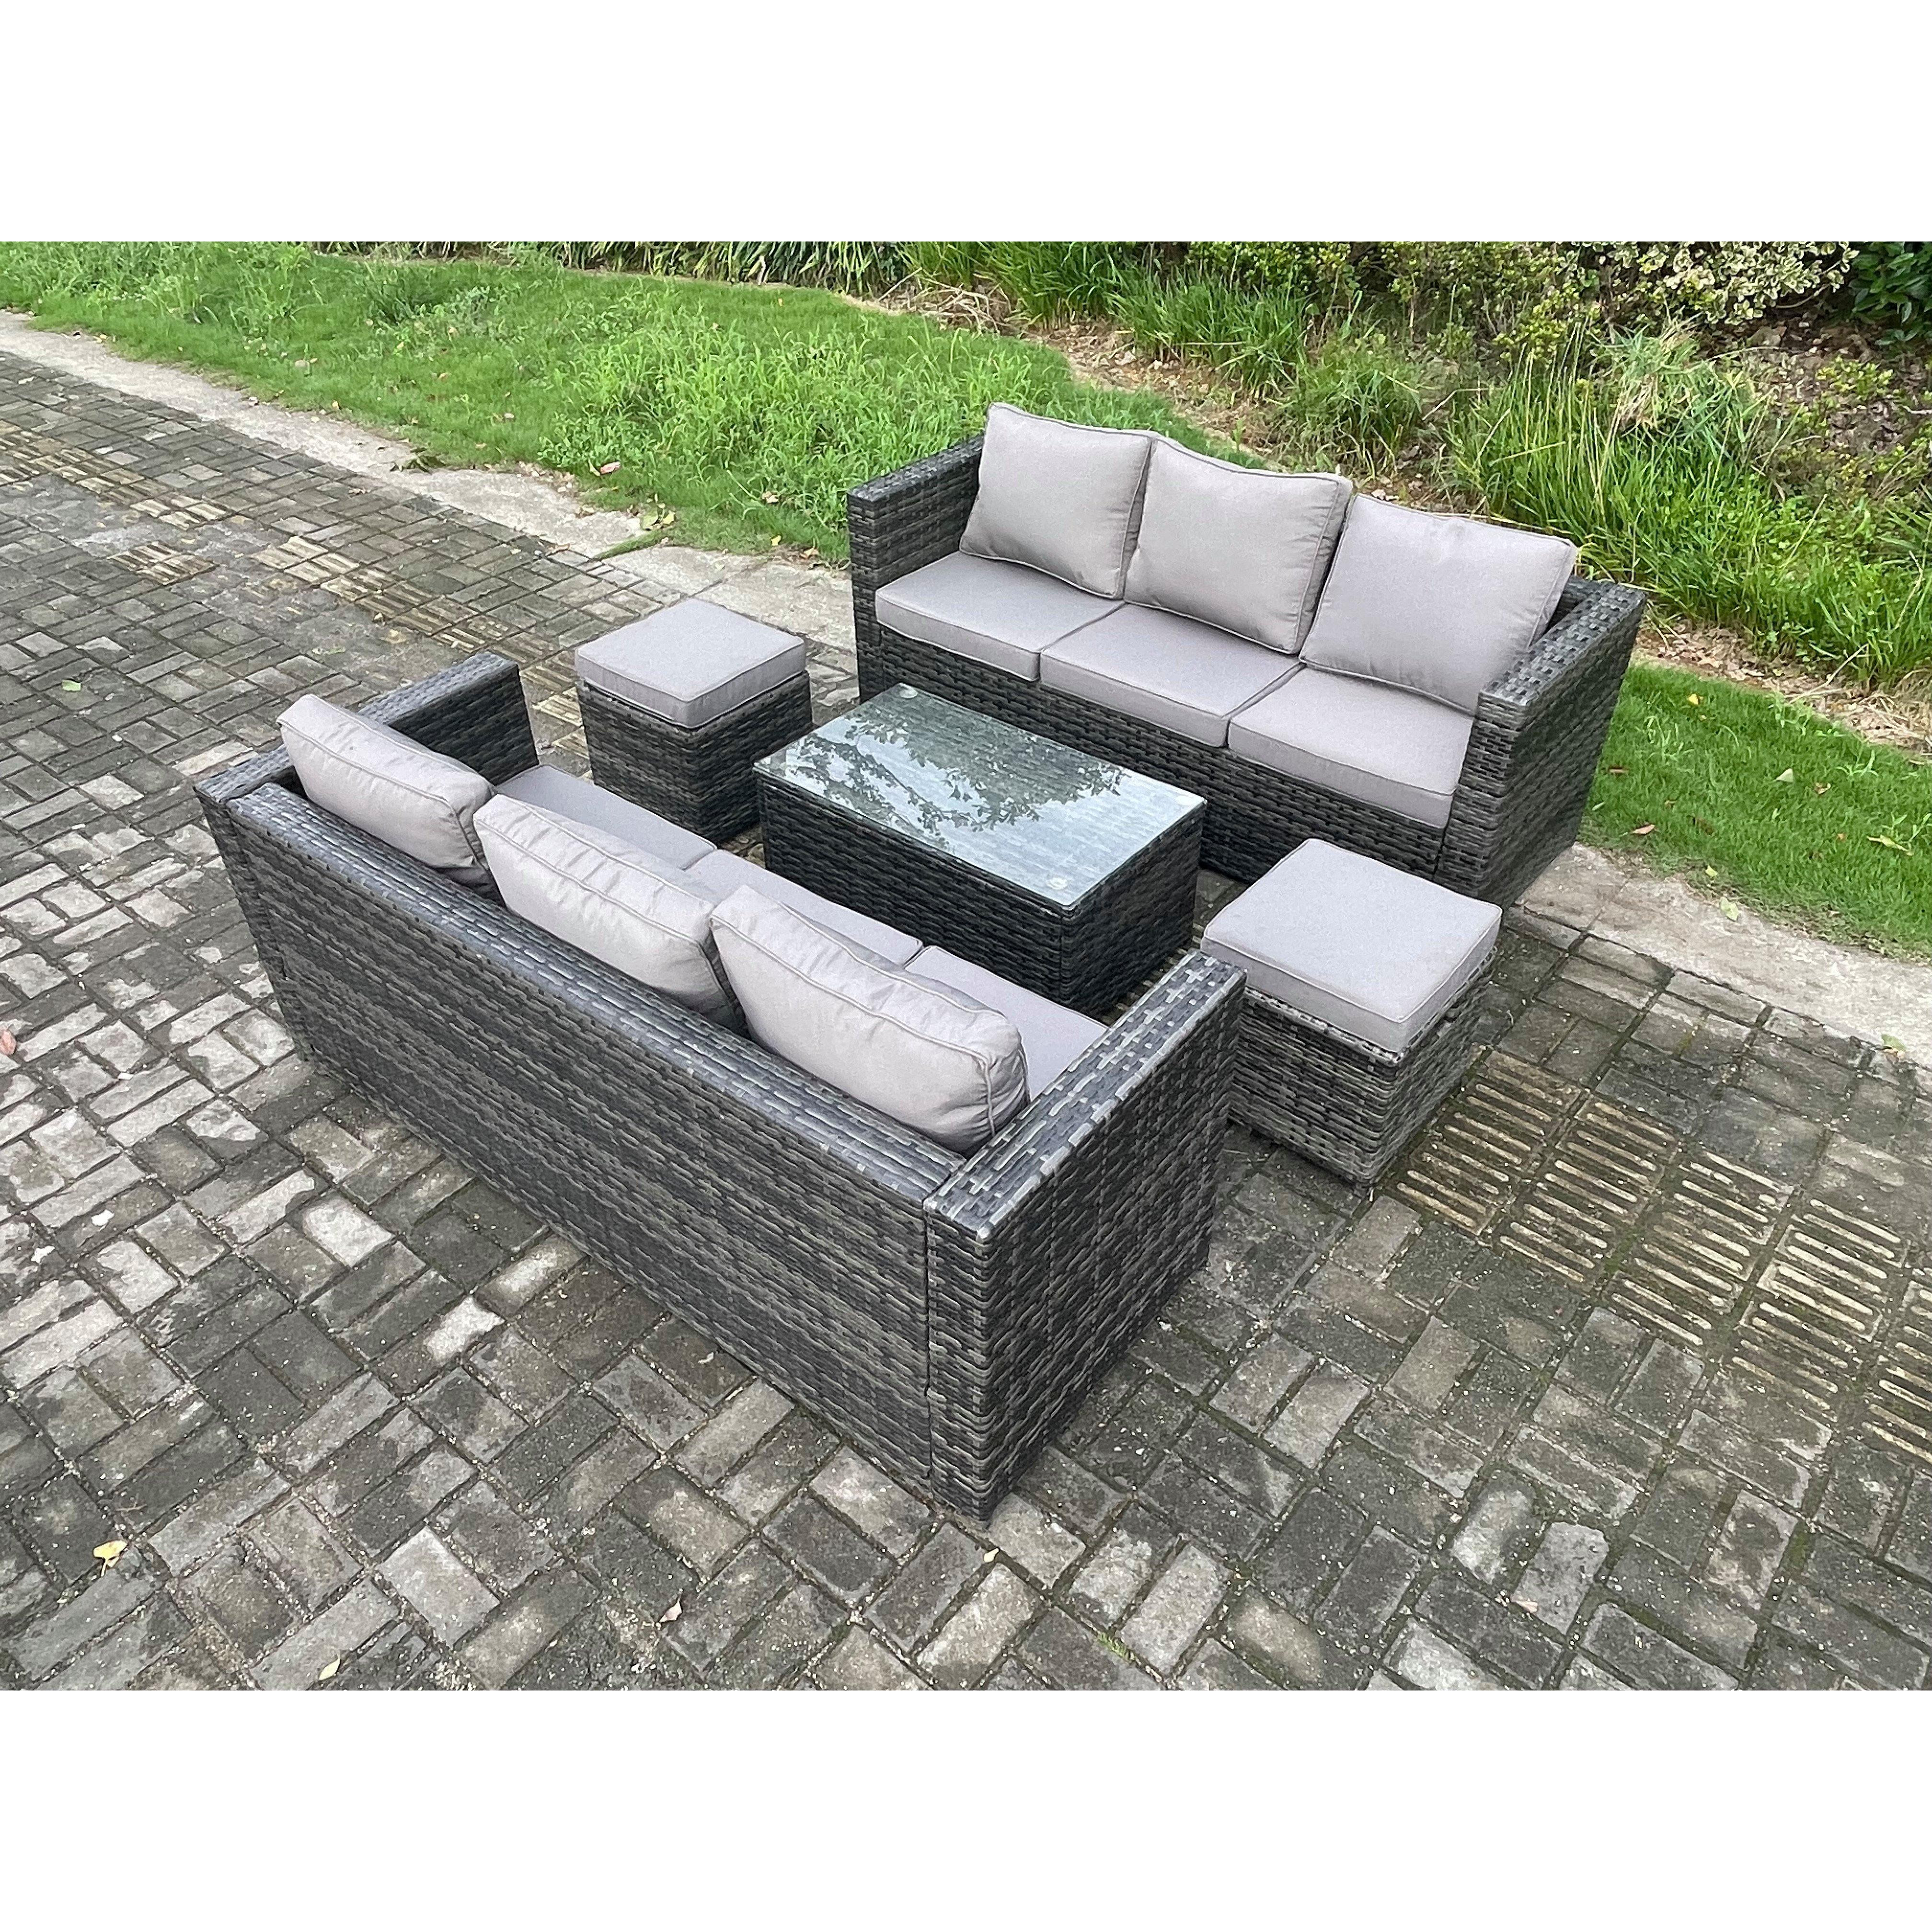 8 Seater Rattan Garden Furniture Set Outdoor Patio Sofa Set with Oblong Coffee Table Small Footstools Dark Grey Mixed - image 1